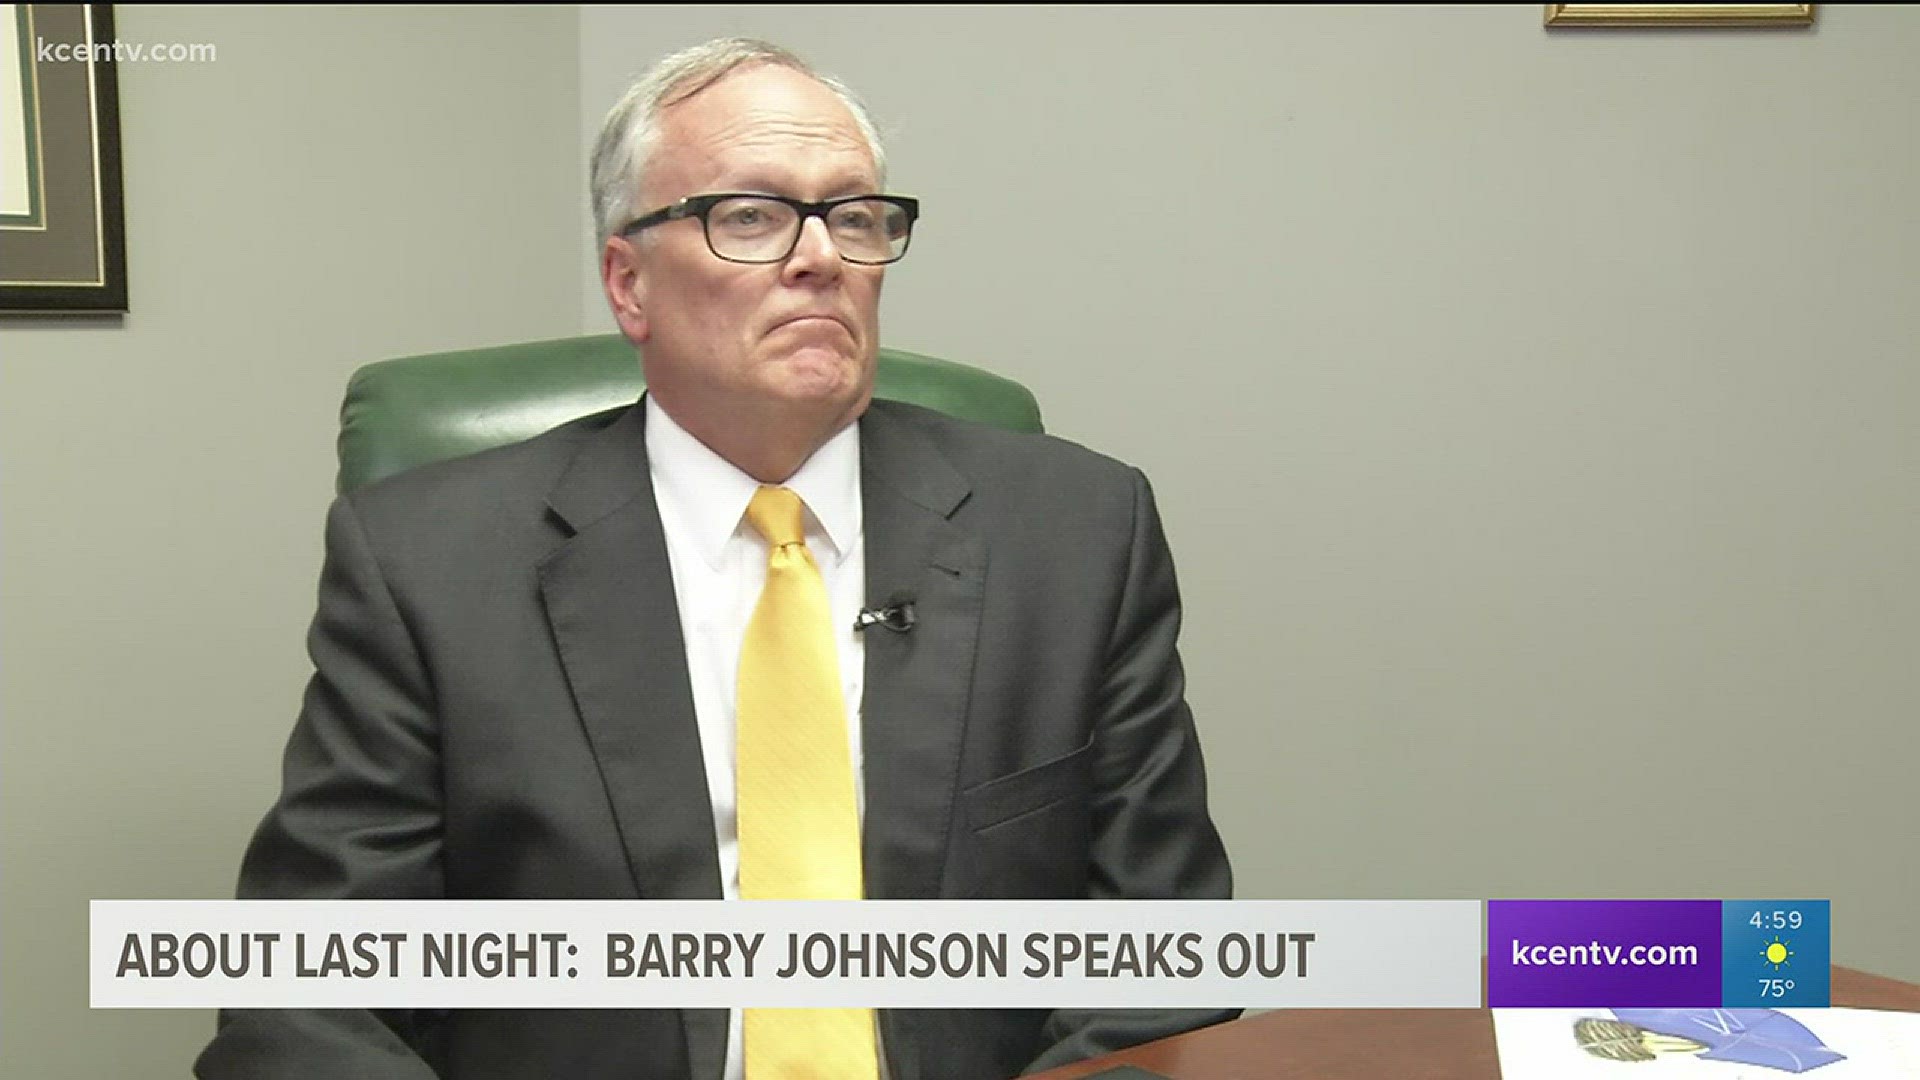 Barry Johnson, the elected Republican nominee for McLennan County District Attorney is speaking out.